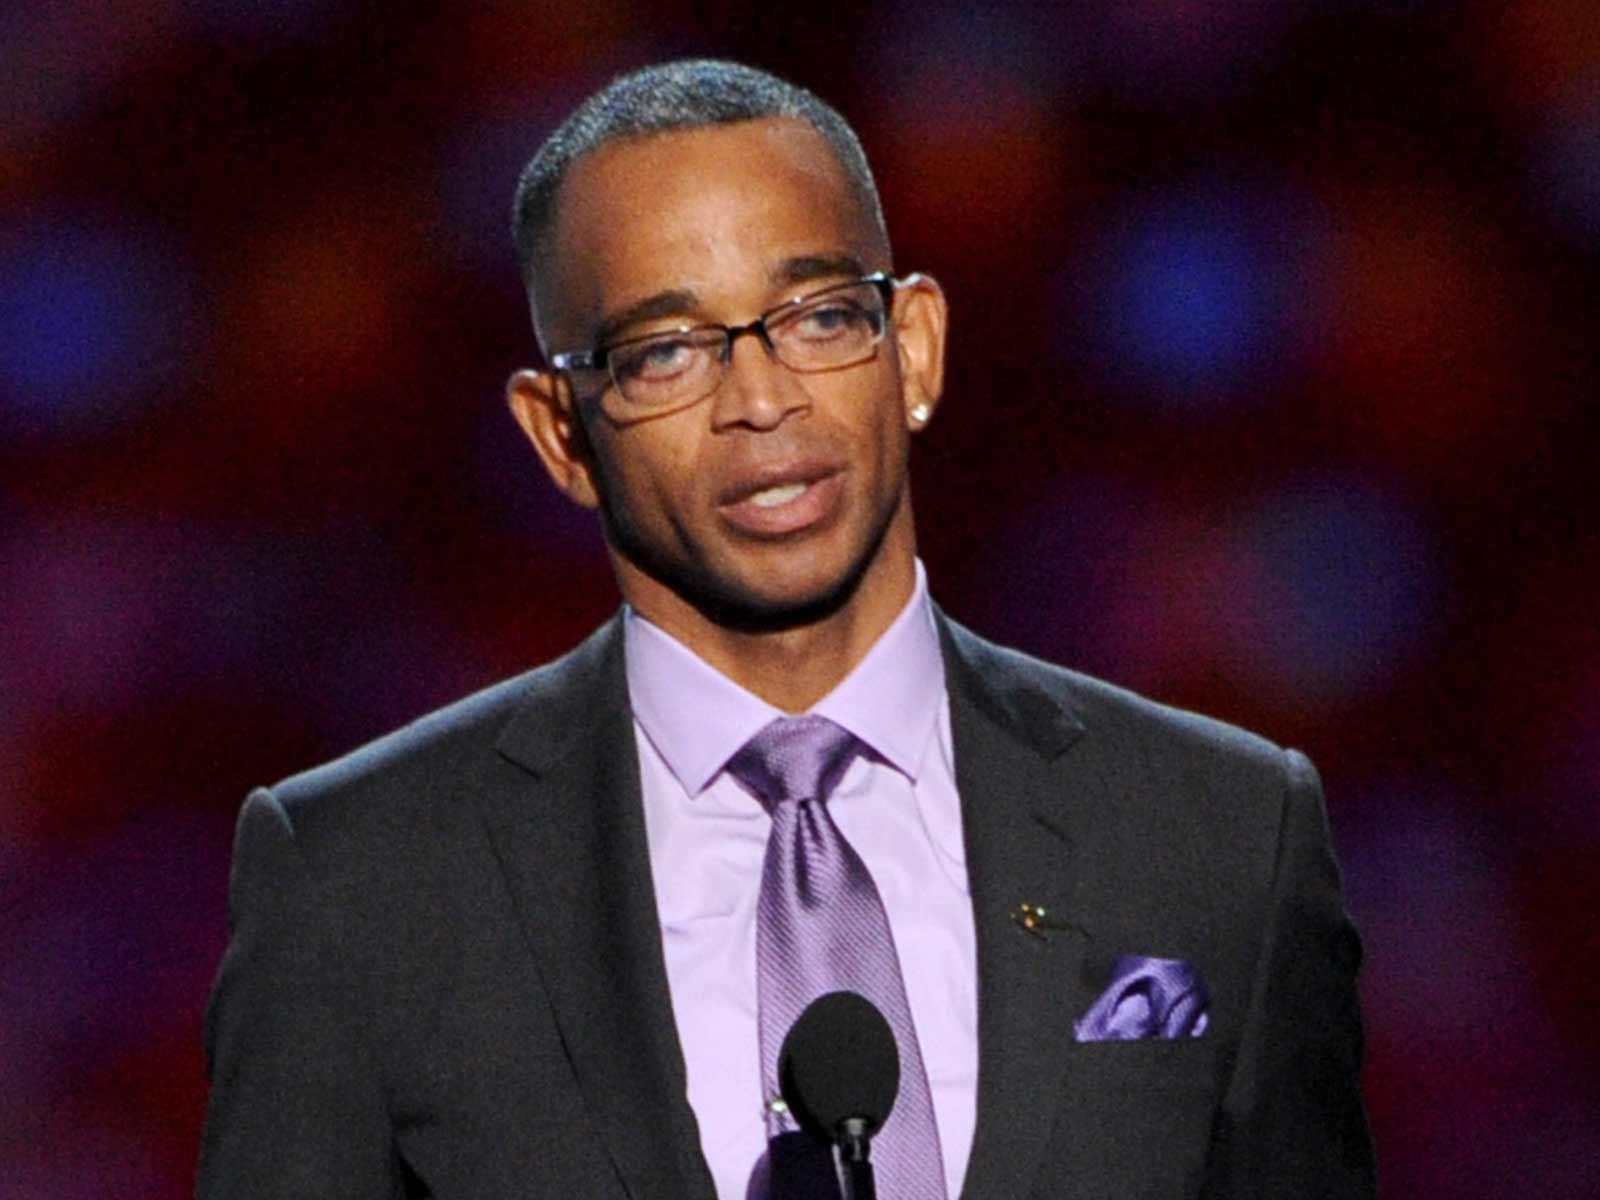 Ex-Wife of Late ESPN Host Stuart Scott Hashing Out Deal With Disney to End Battle Over Money He Left Behind